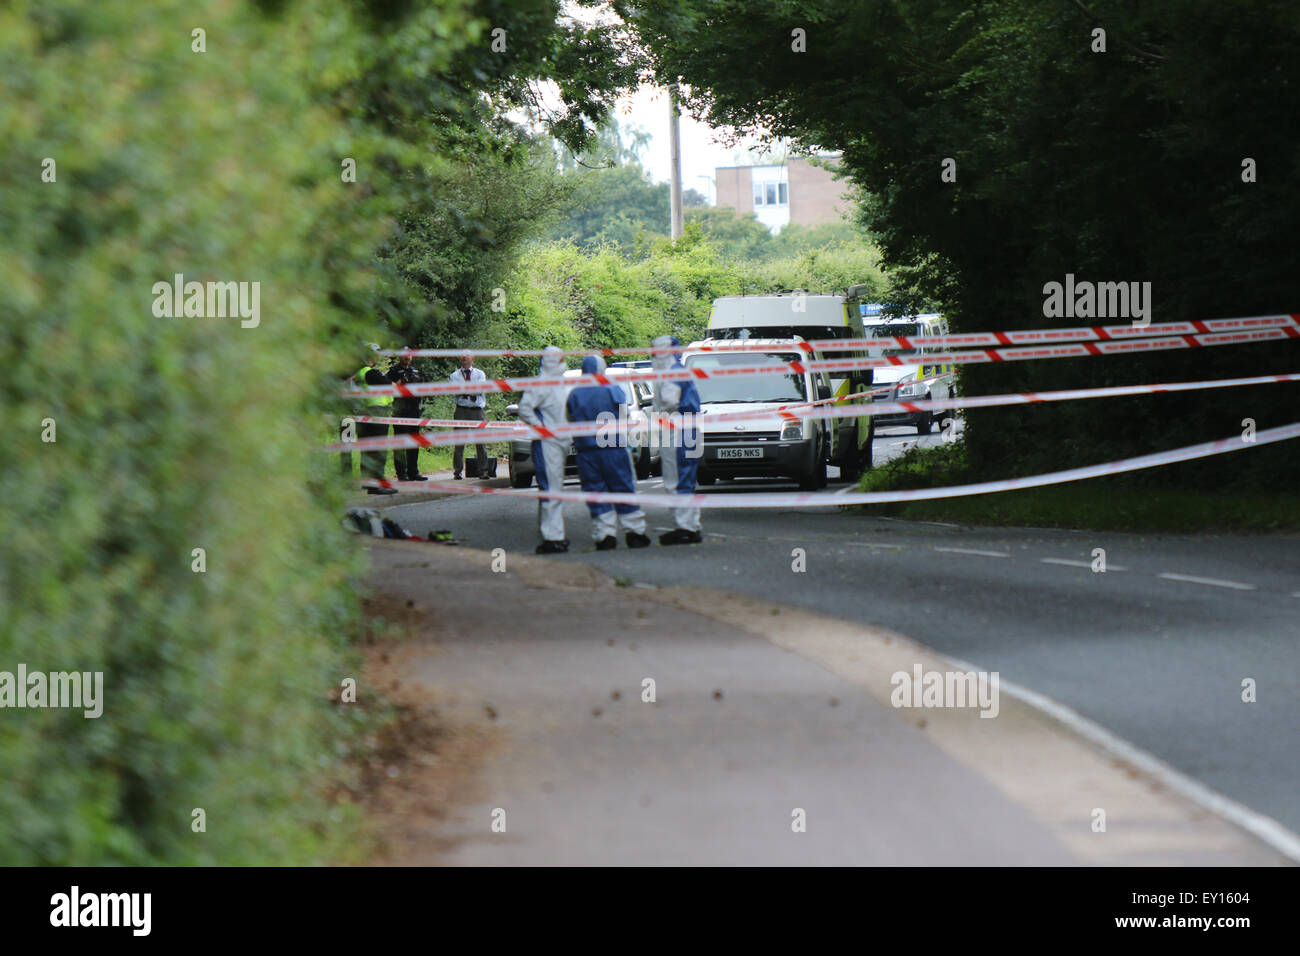 FILE PICS: Havant, UK. 26th June, 2015. Pictures from Scene of Double Stabbing in Havant Sunday 19 July 2015 : A homeless man who was facing trial for the attempted murder of two schoolboys has been found dead in his prison cell. Richard Walsh, 43, was accused of stabbing the two children, aged 12 and 13, in a street in Havant, last month. He was remanded in custody to Belmarsh Prison in south east London.  Jail staff found Walsh unresponsive in his cell this morning.  Staff and paramedics battled to save his life but he was pronounced dead. Credit:  jason kay/Alamy Live News Stock Photo